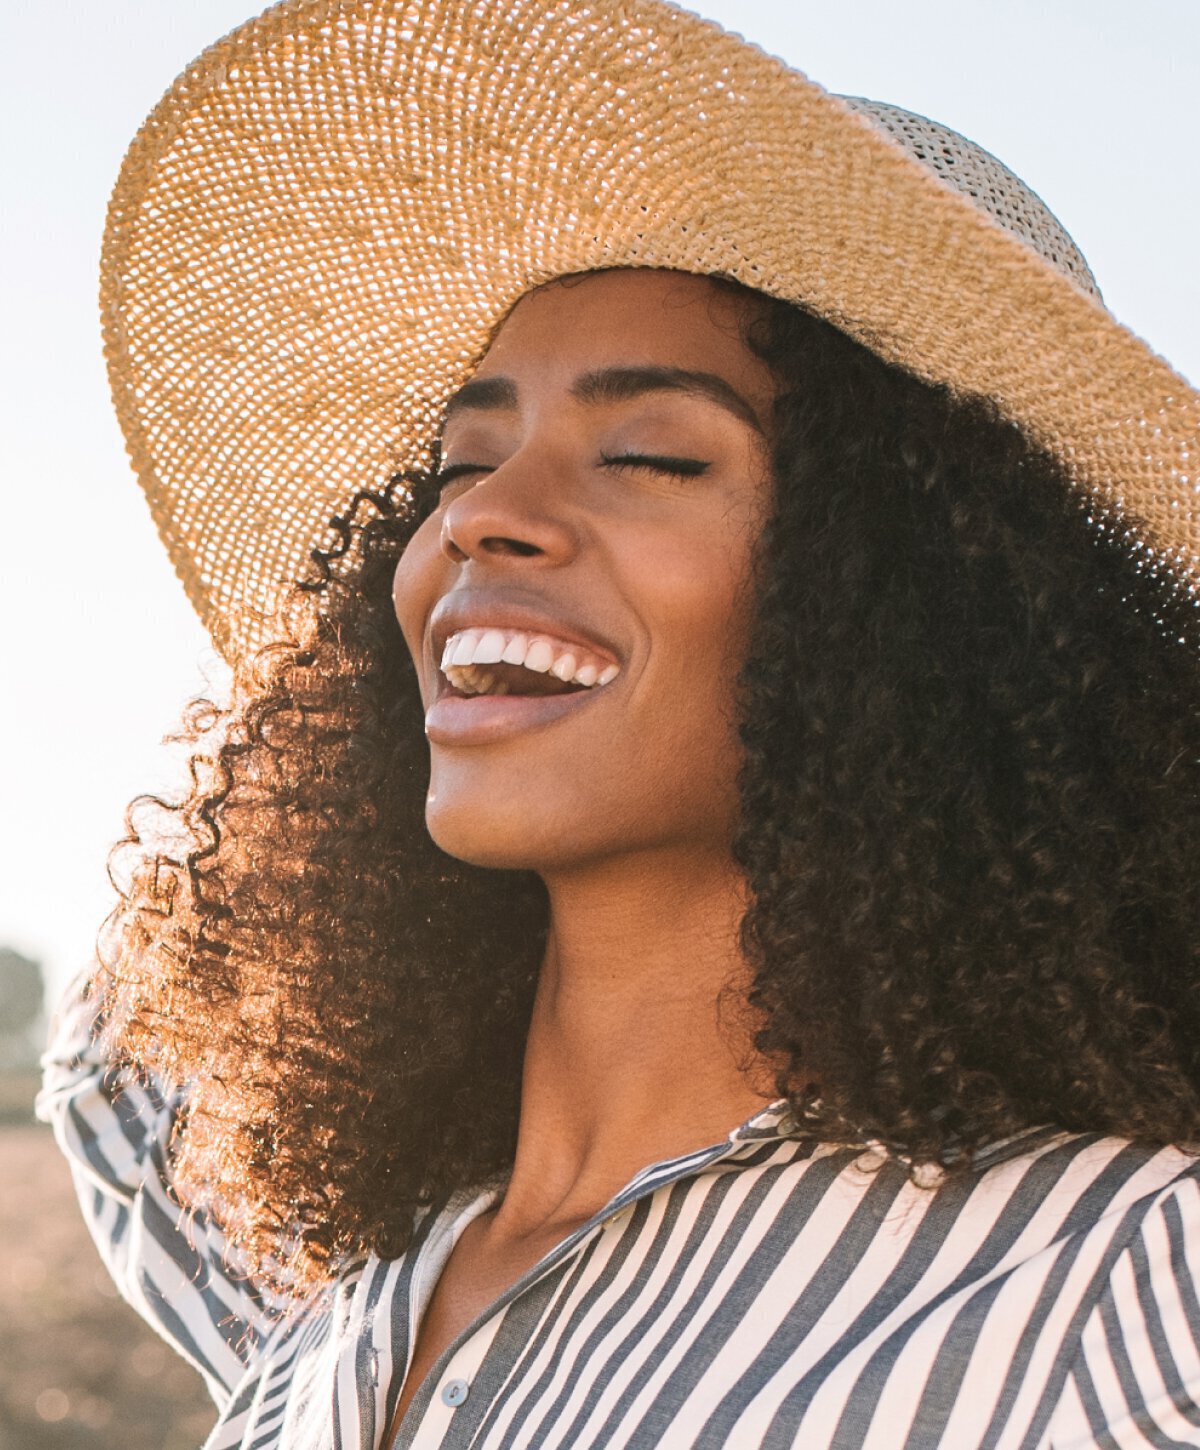 houston botox model with curly black hair smiling in sun hat